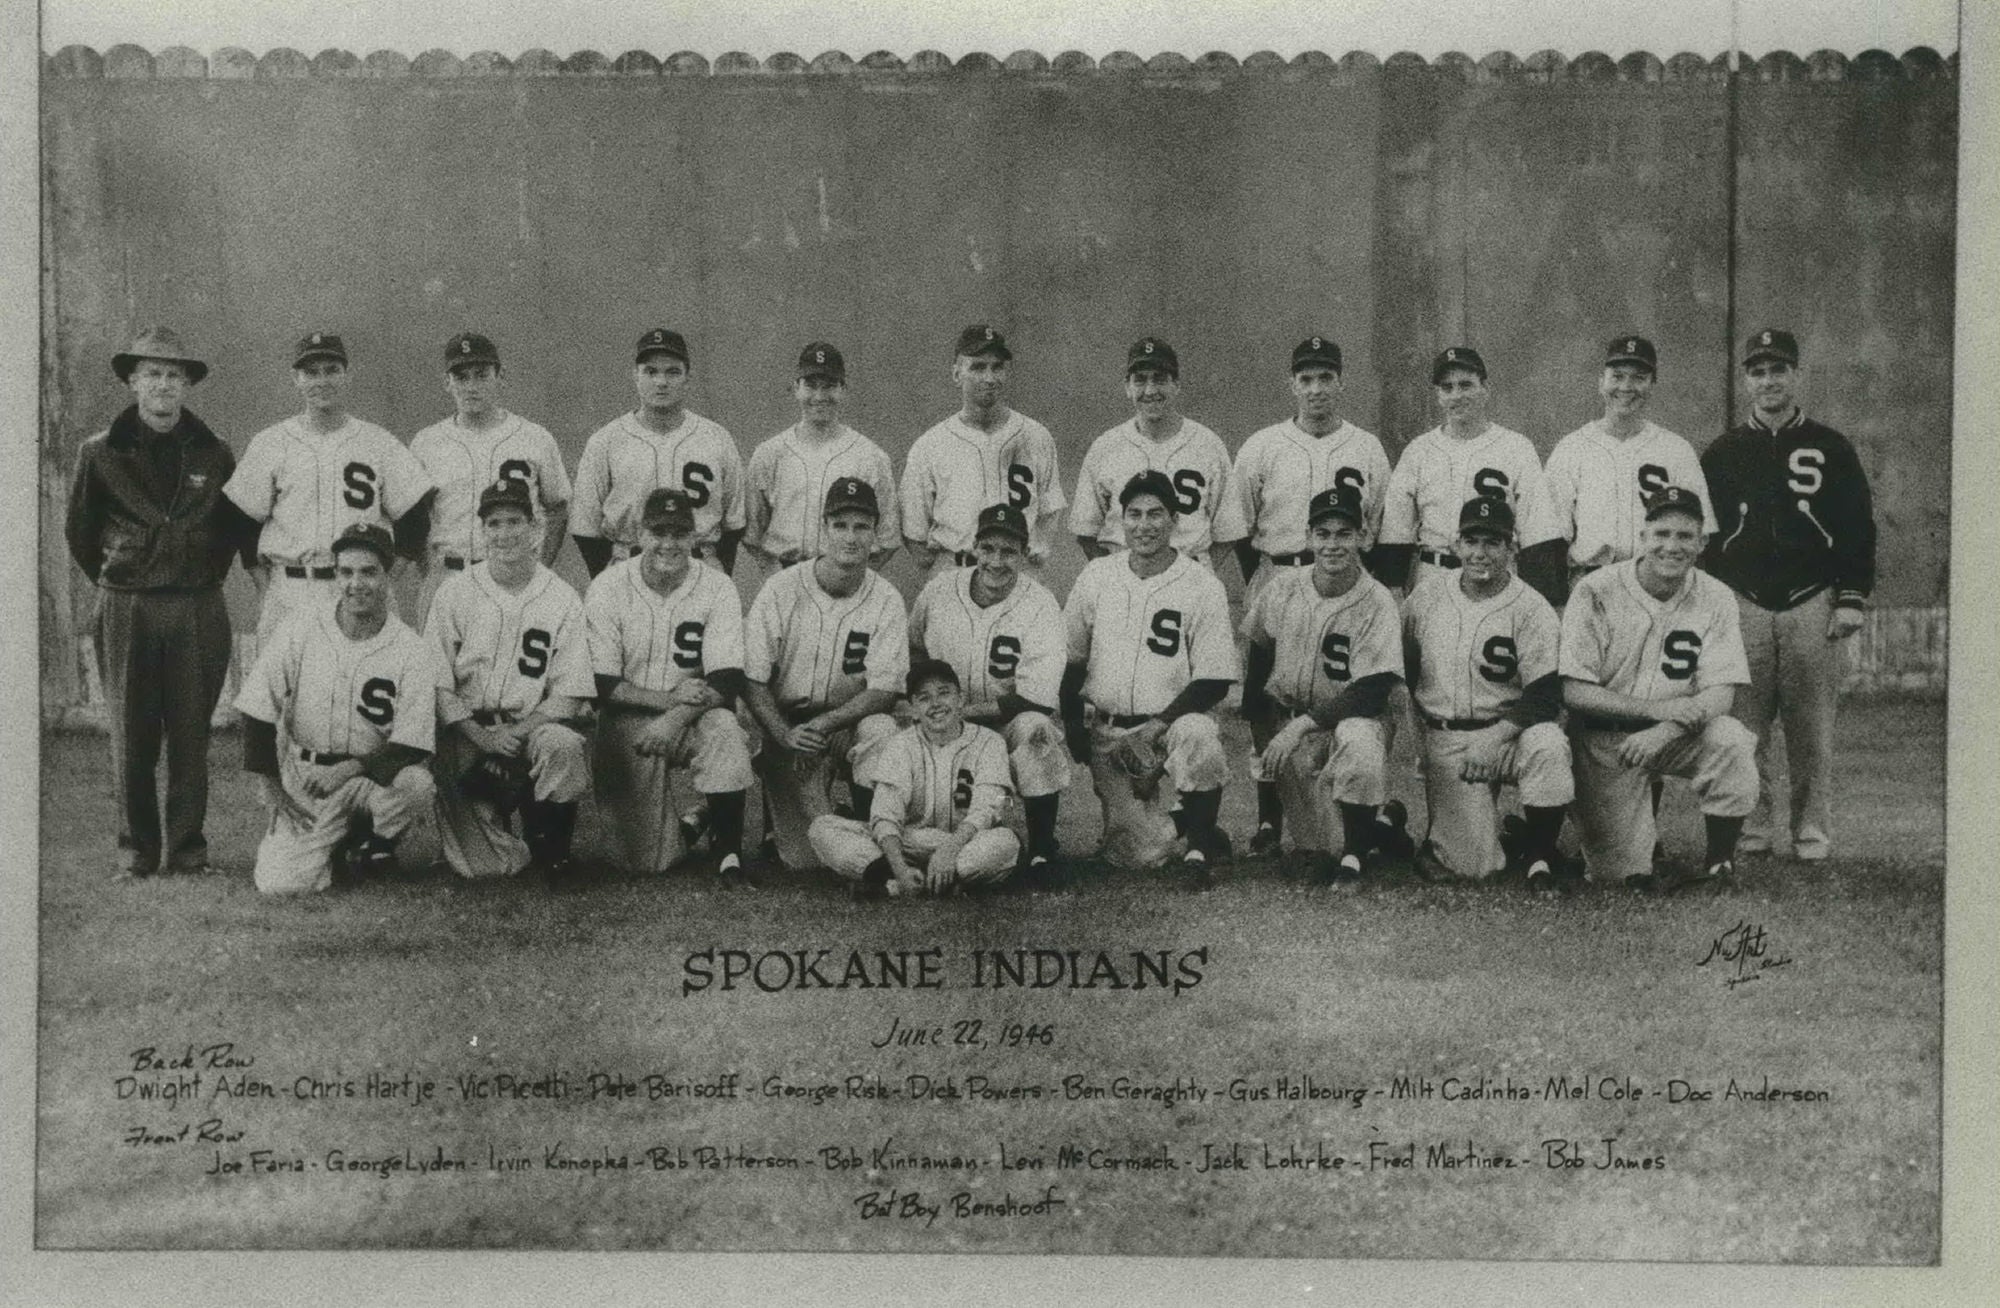 In 1946, unfathomable tragedy struck the Spokane Indians ...